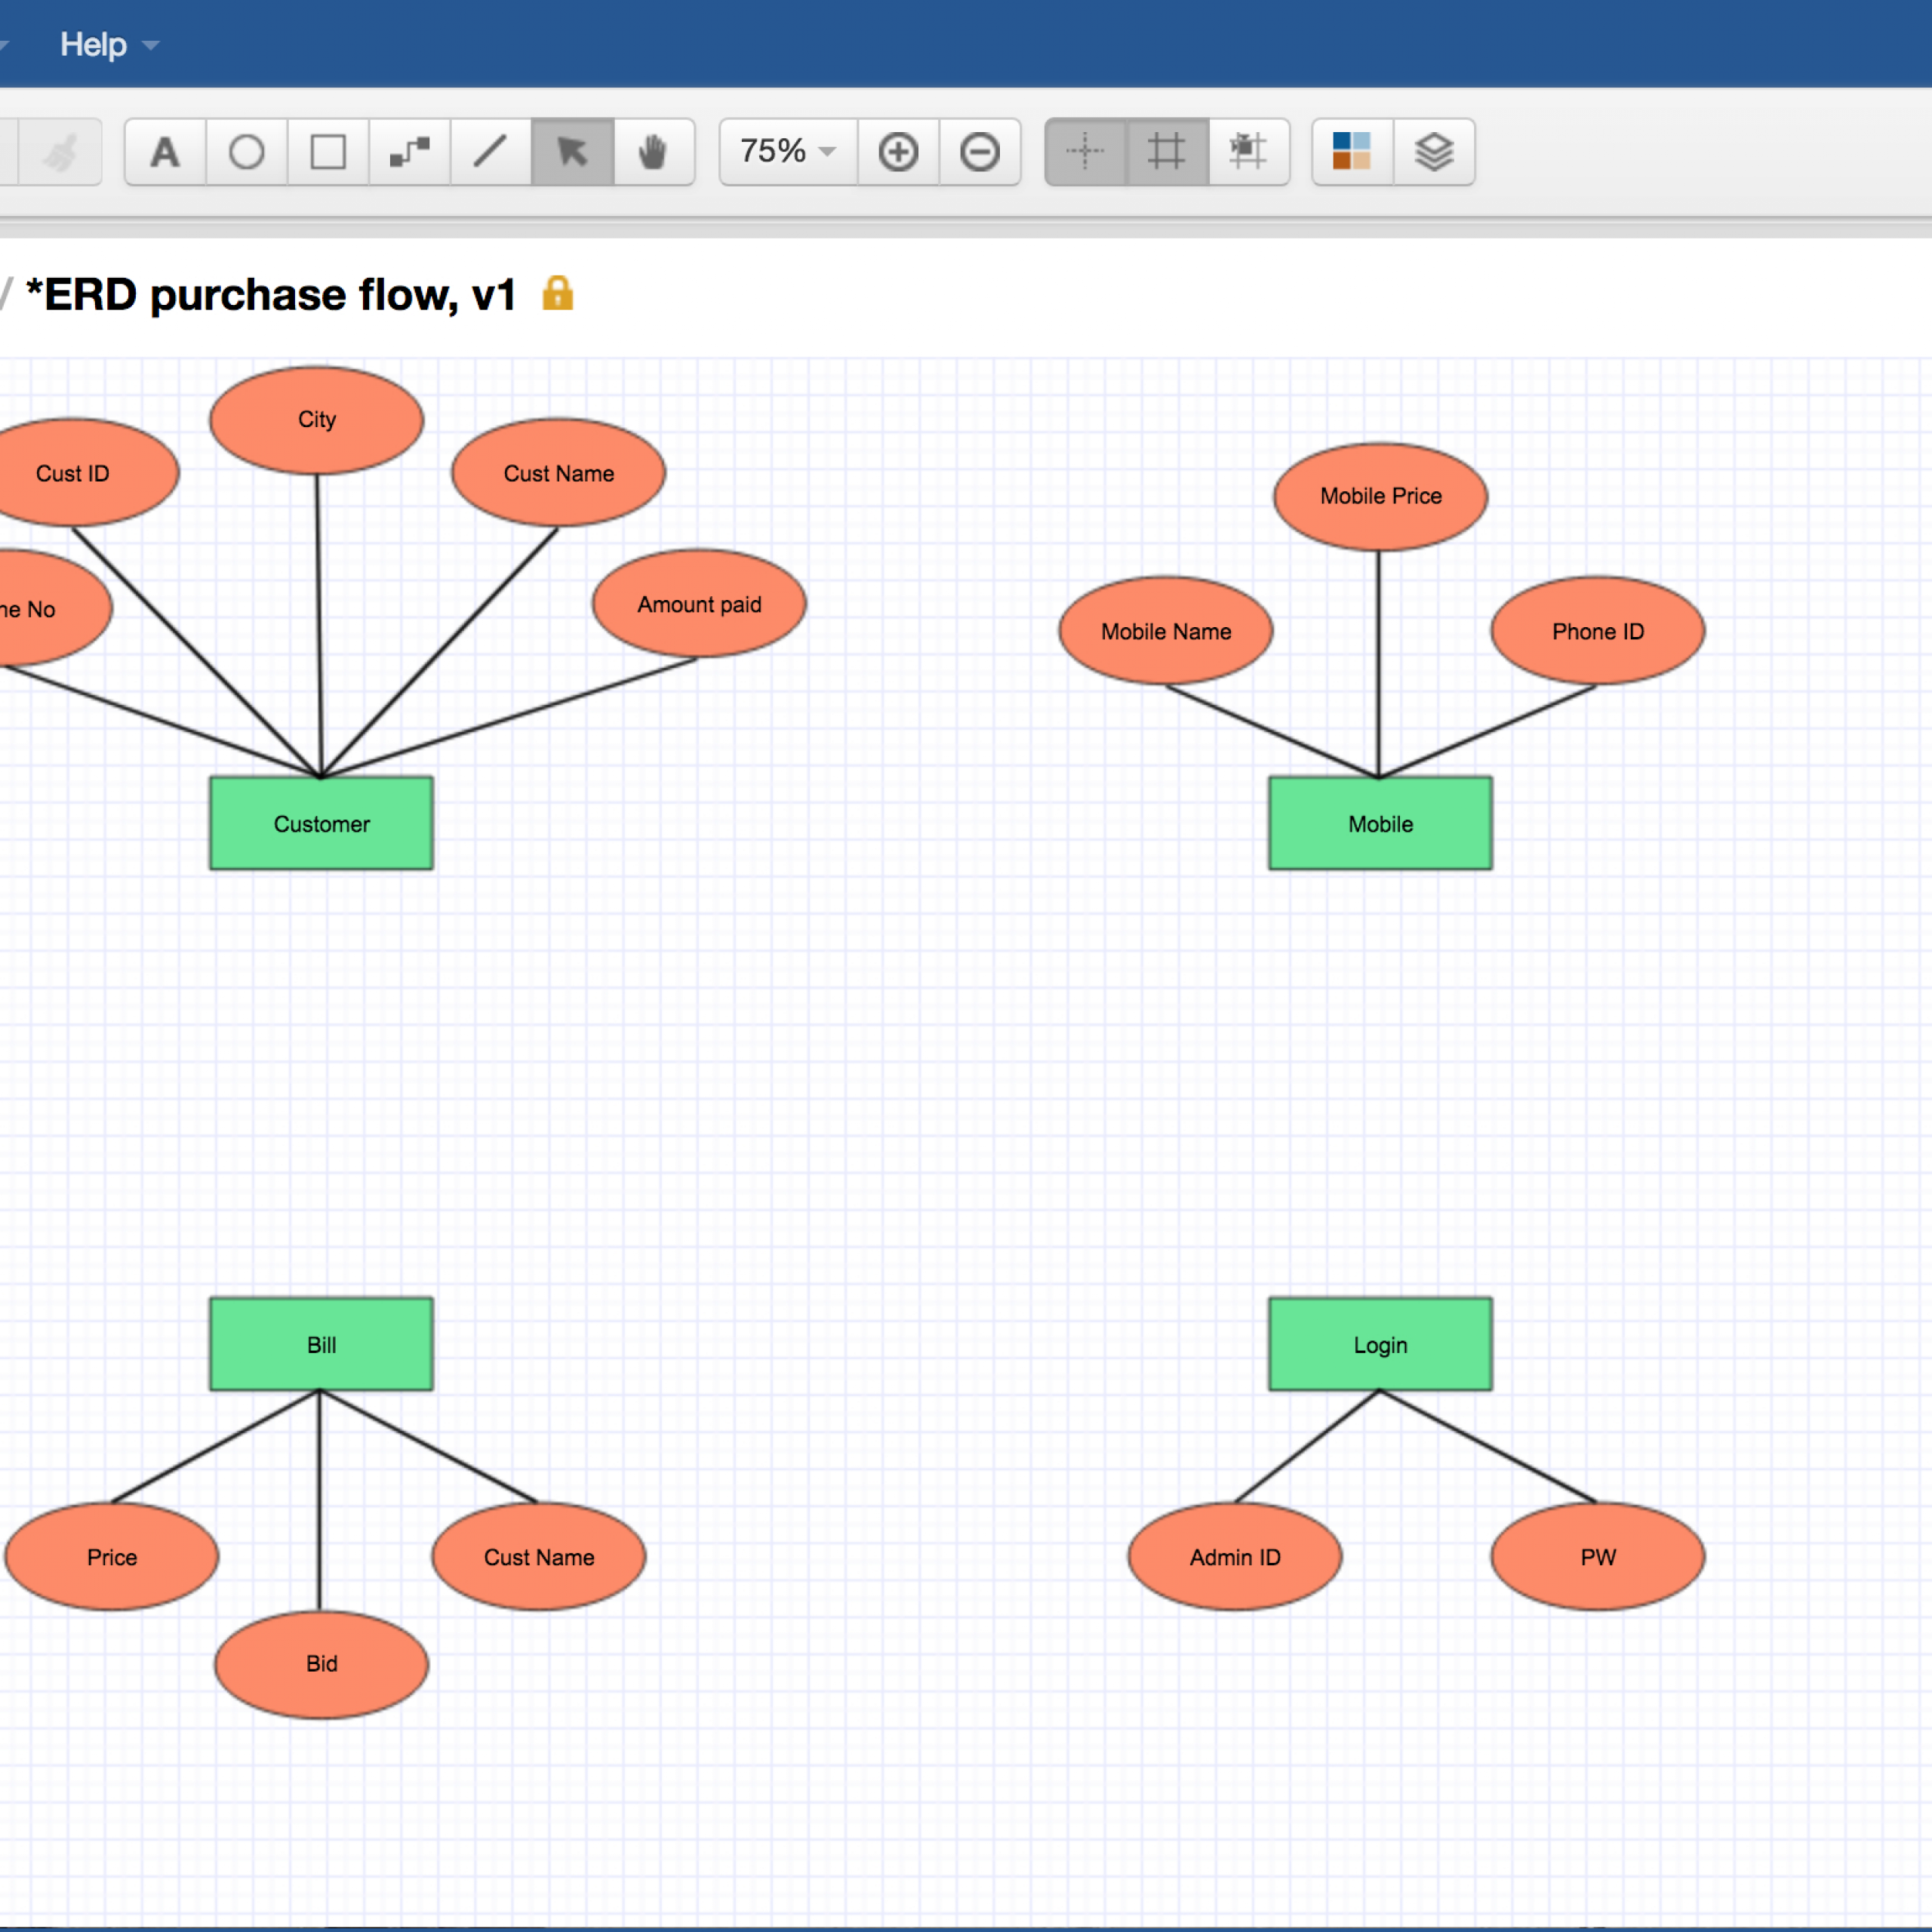 How To Draw An Entity-Relationship Diagram inside Draw Erd Diagram